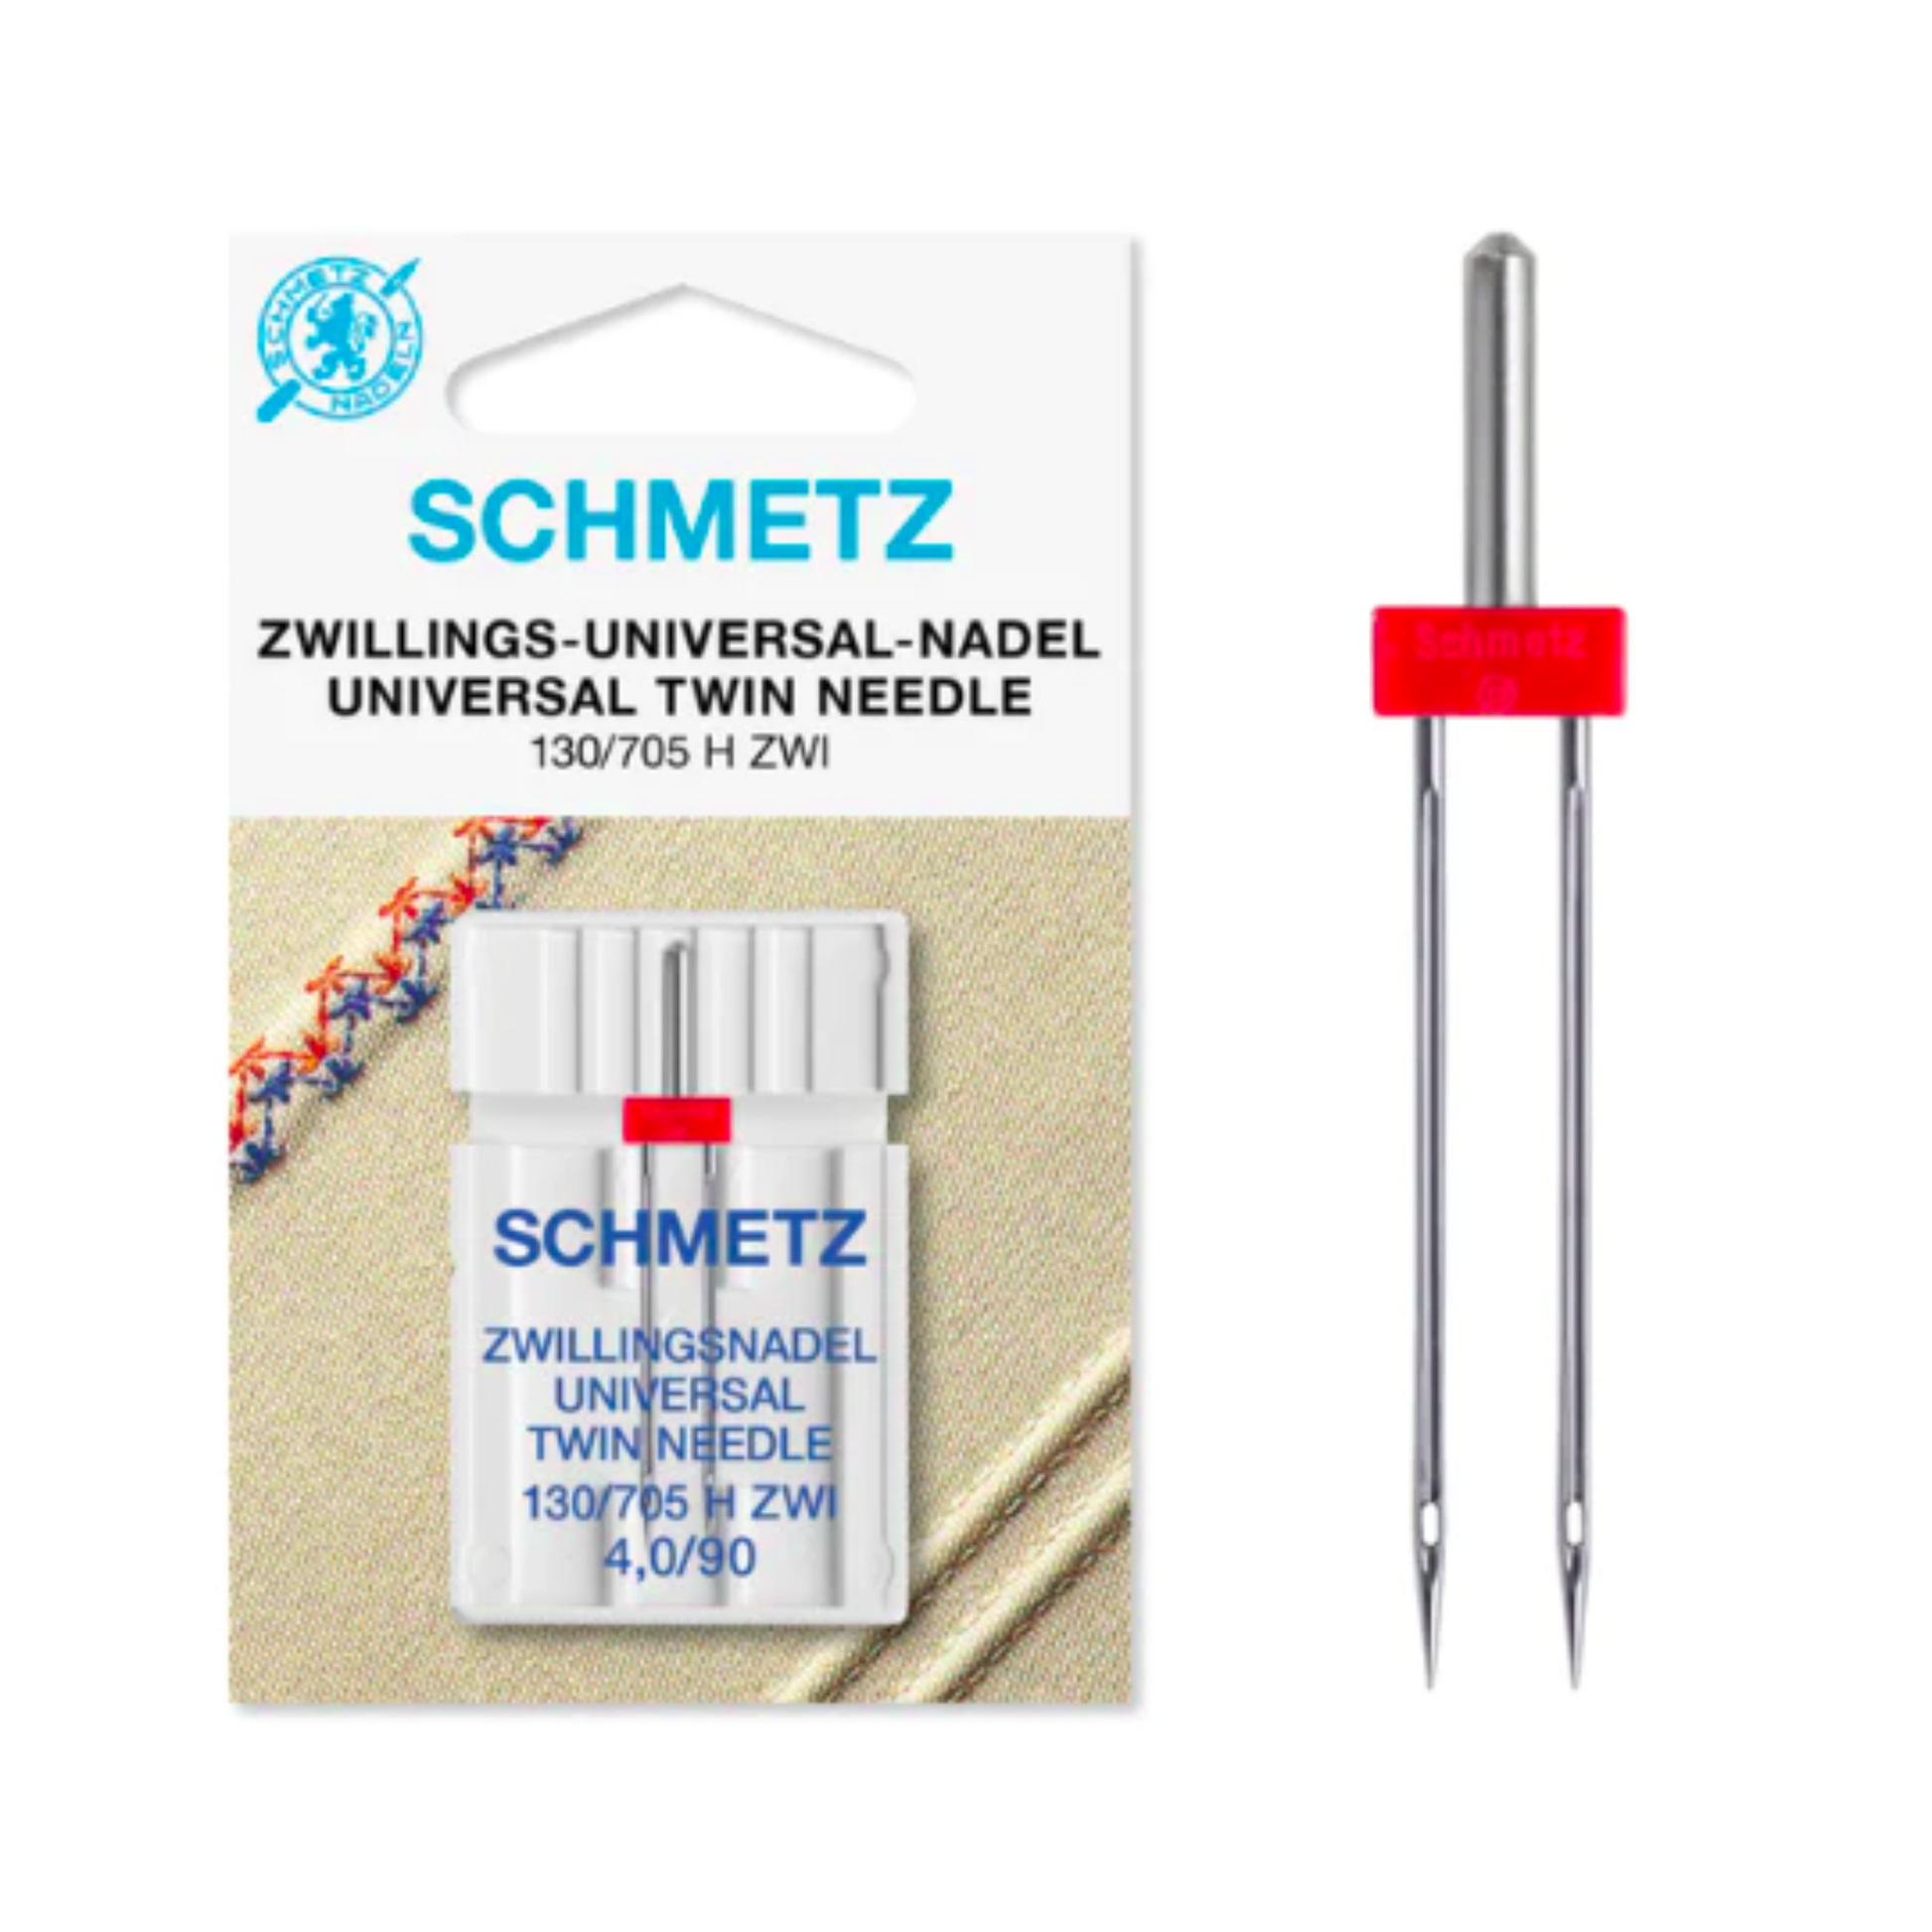 Schmetz - Universal twin needle - Sewing needle - Silver - Front view